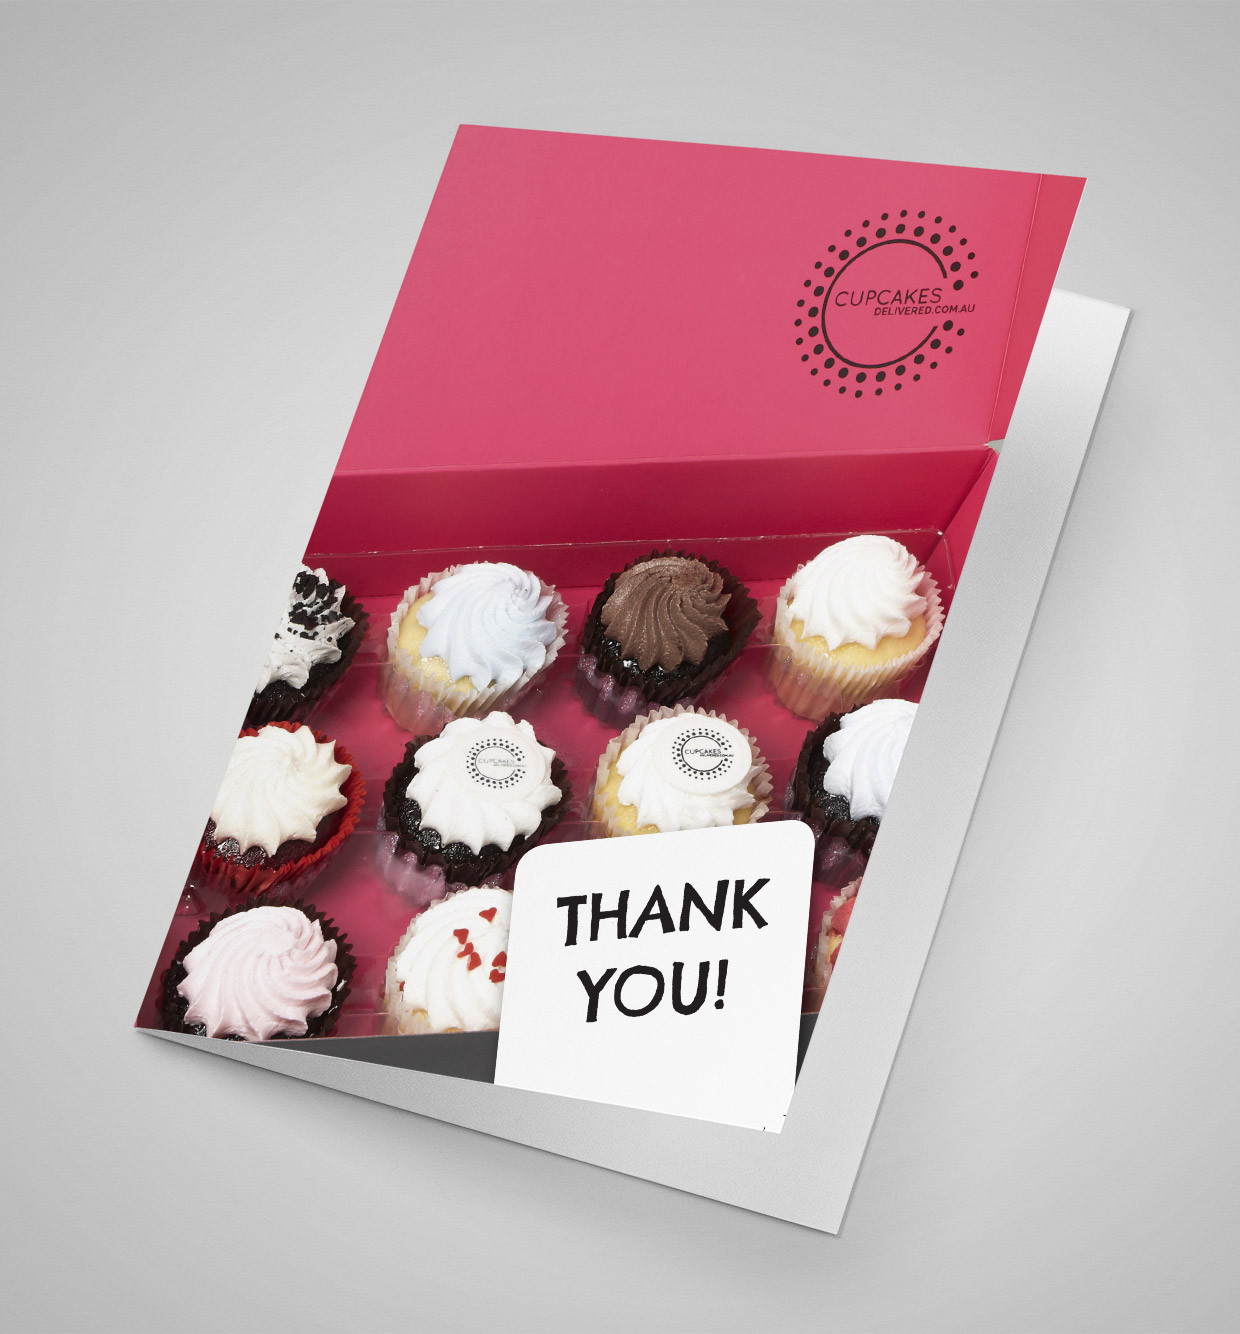 Corporate Thank You Gift Ideas
 Personalised & Custom Printed Cupcakes Corporate Events